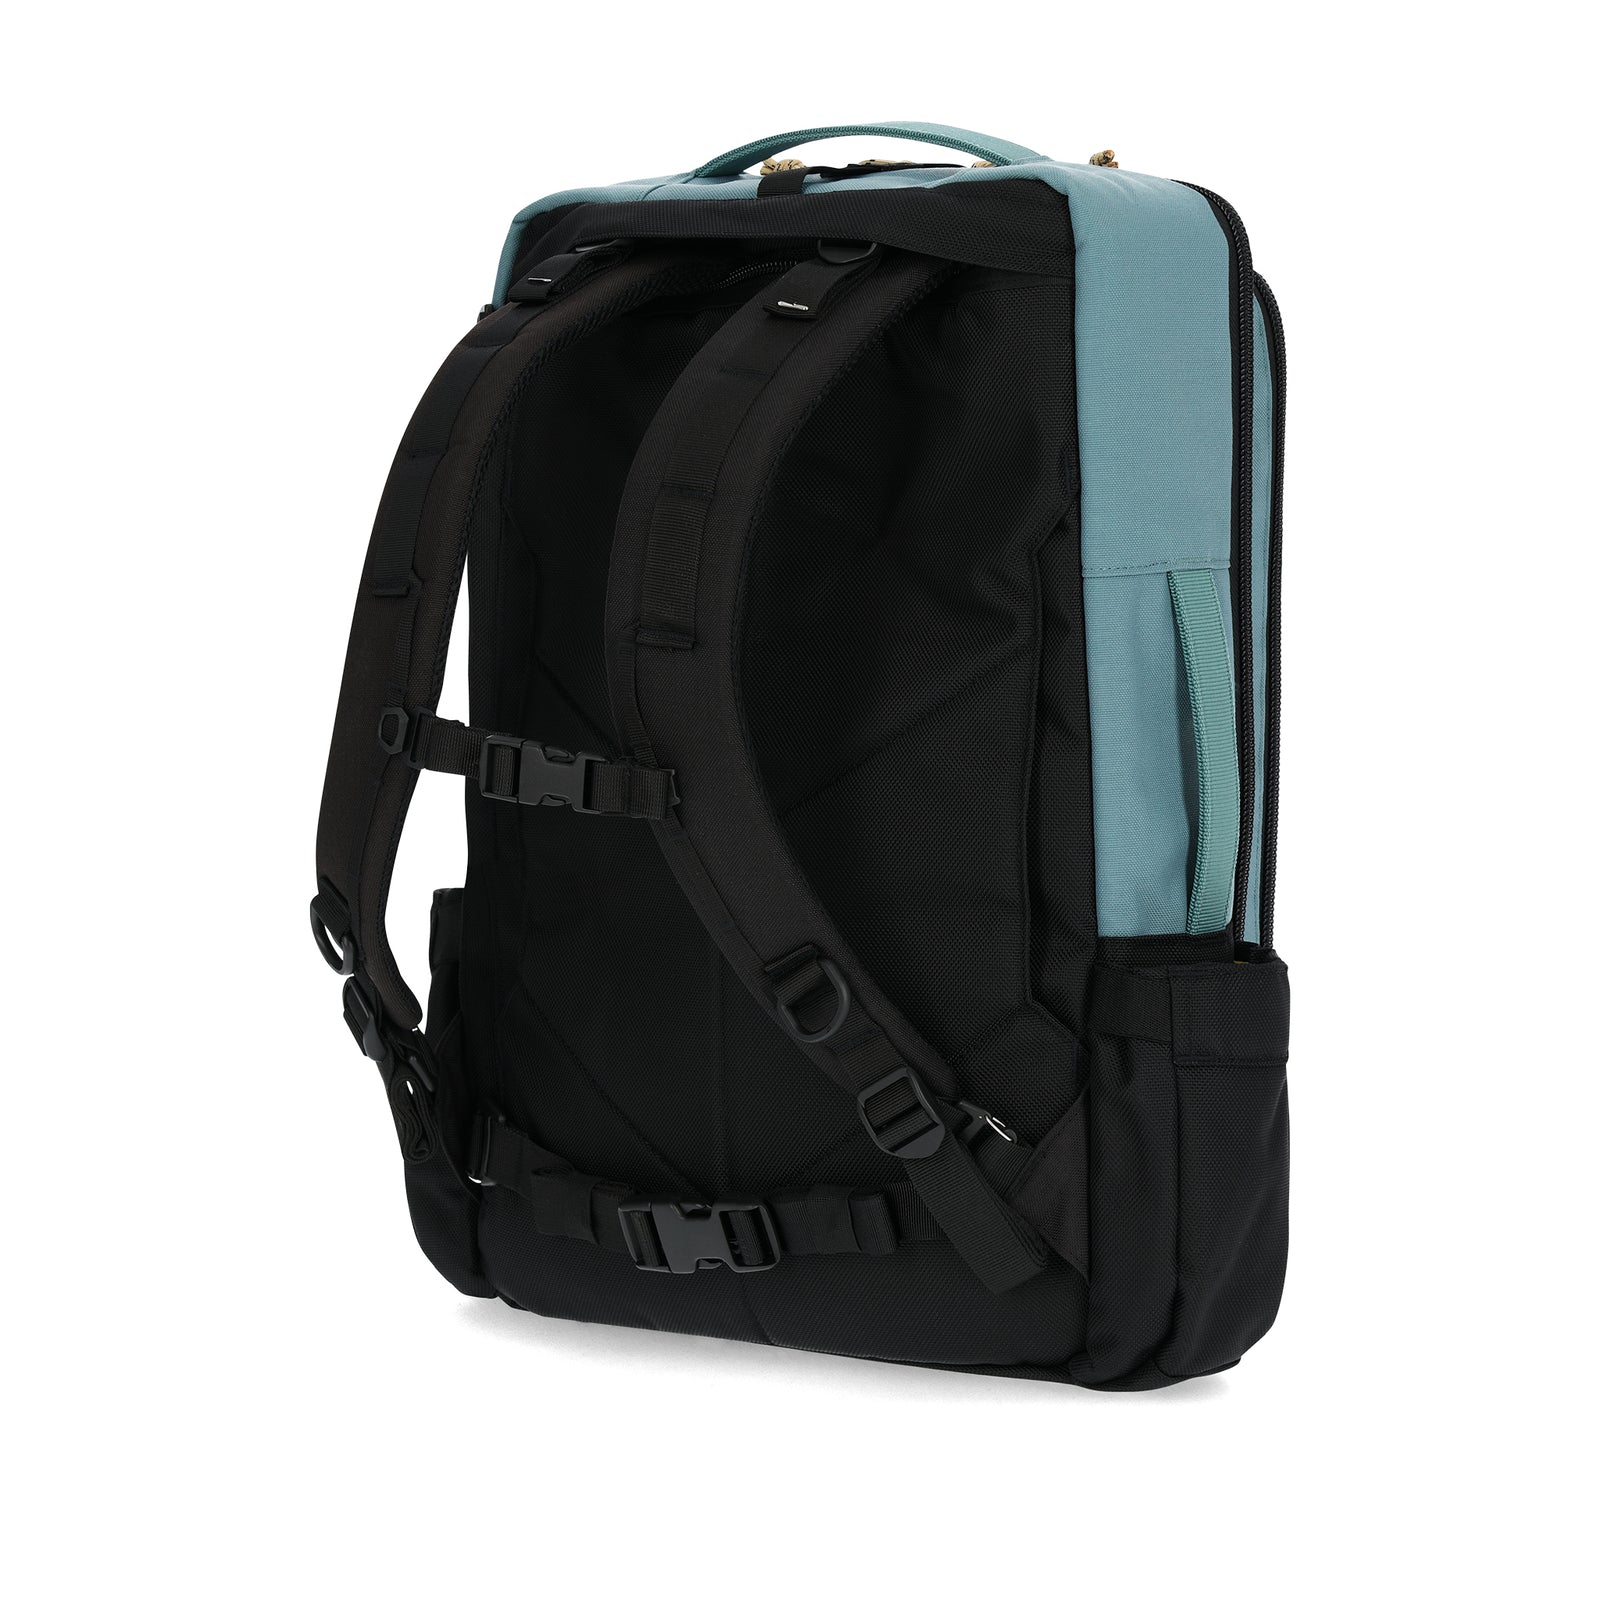 Back View of Topo Designs Global Travel Bag 30L  in "Sea Pine"